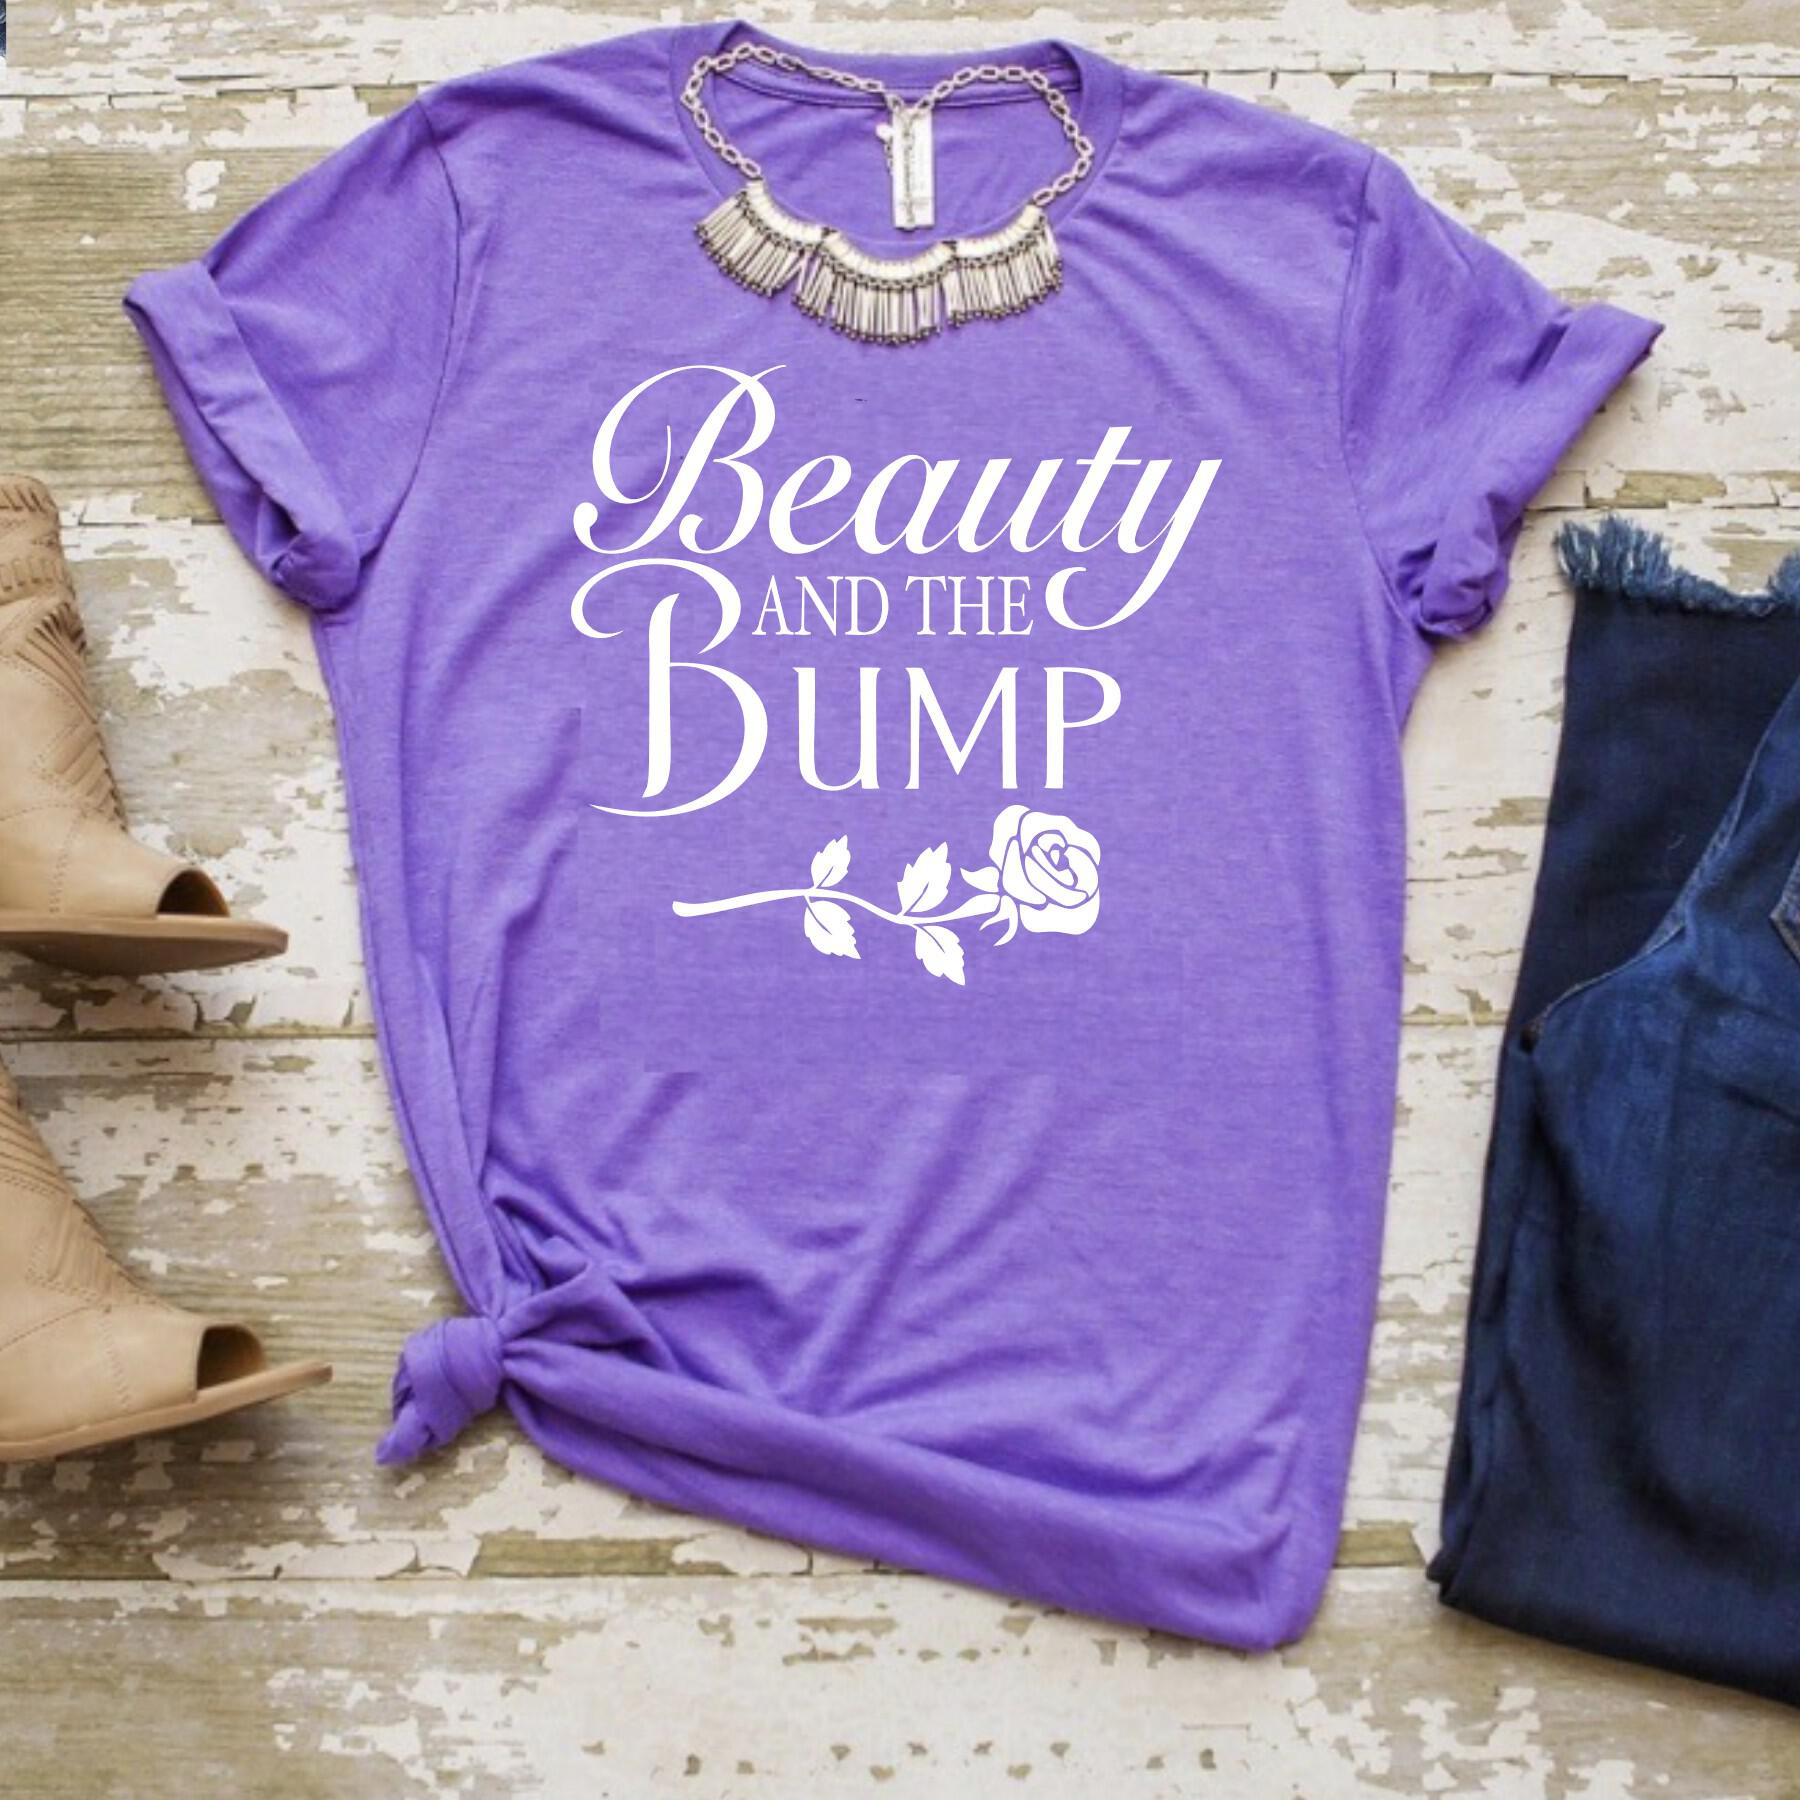 Beauty and The Bump, Pregnancy Announcement Shirt, Disney Maternity, Funny  Pregnancy Shirt, Beauty and the Beast Shirt, Bump Alert, Funny Bump Shirt,  Disney Pregnancy, Disney Bump Adult Unisex Shirts